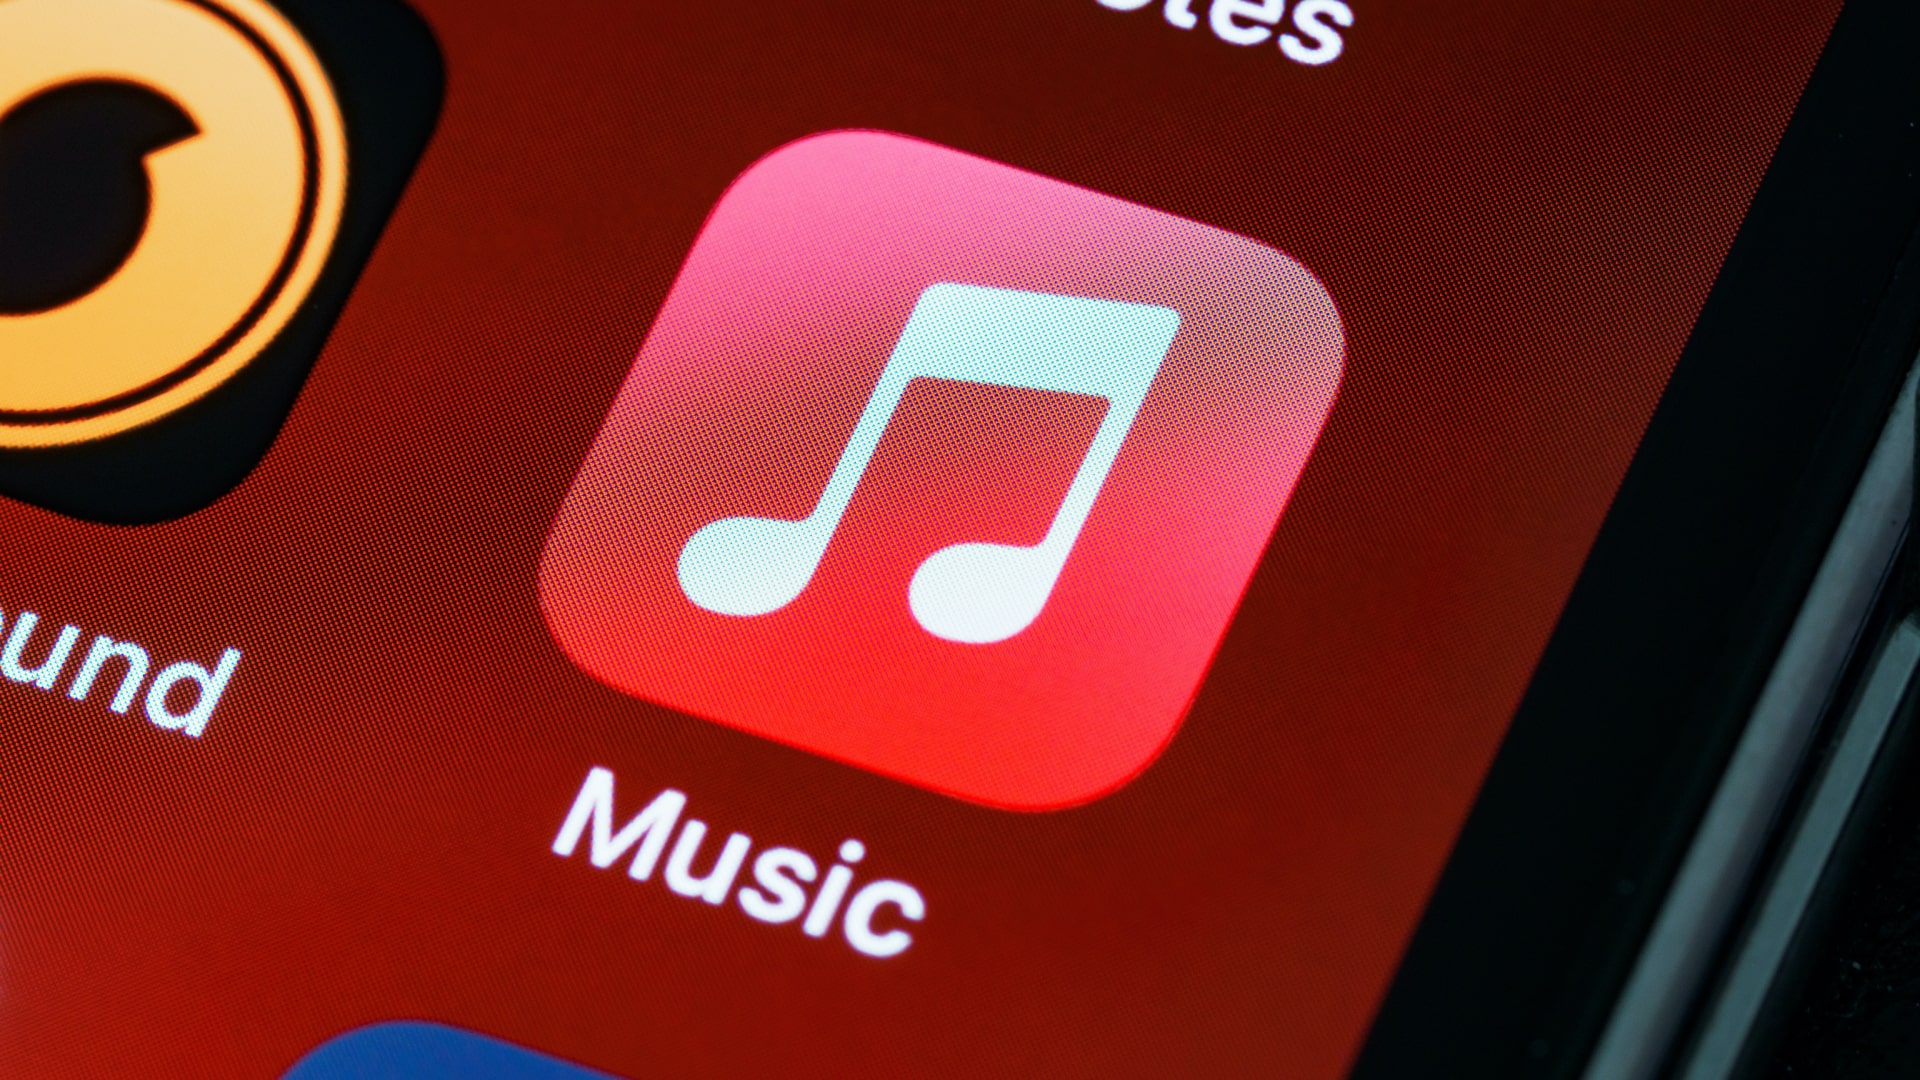 The Apple Music app icon against a red background on an iPhone.